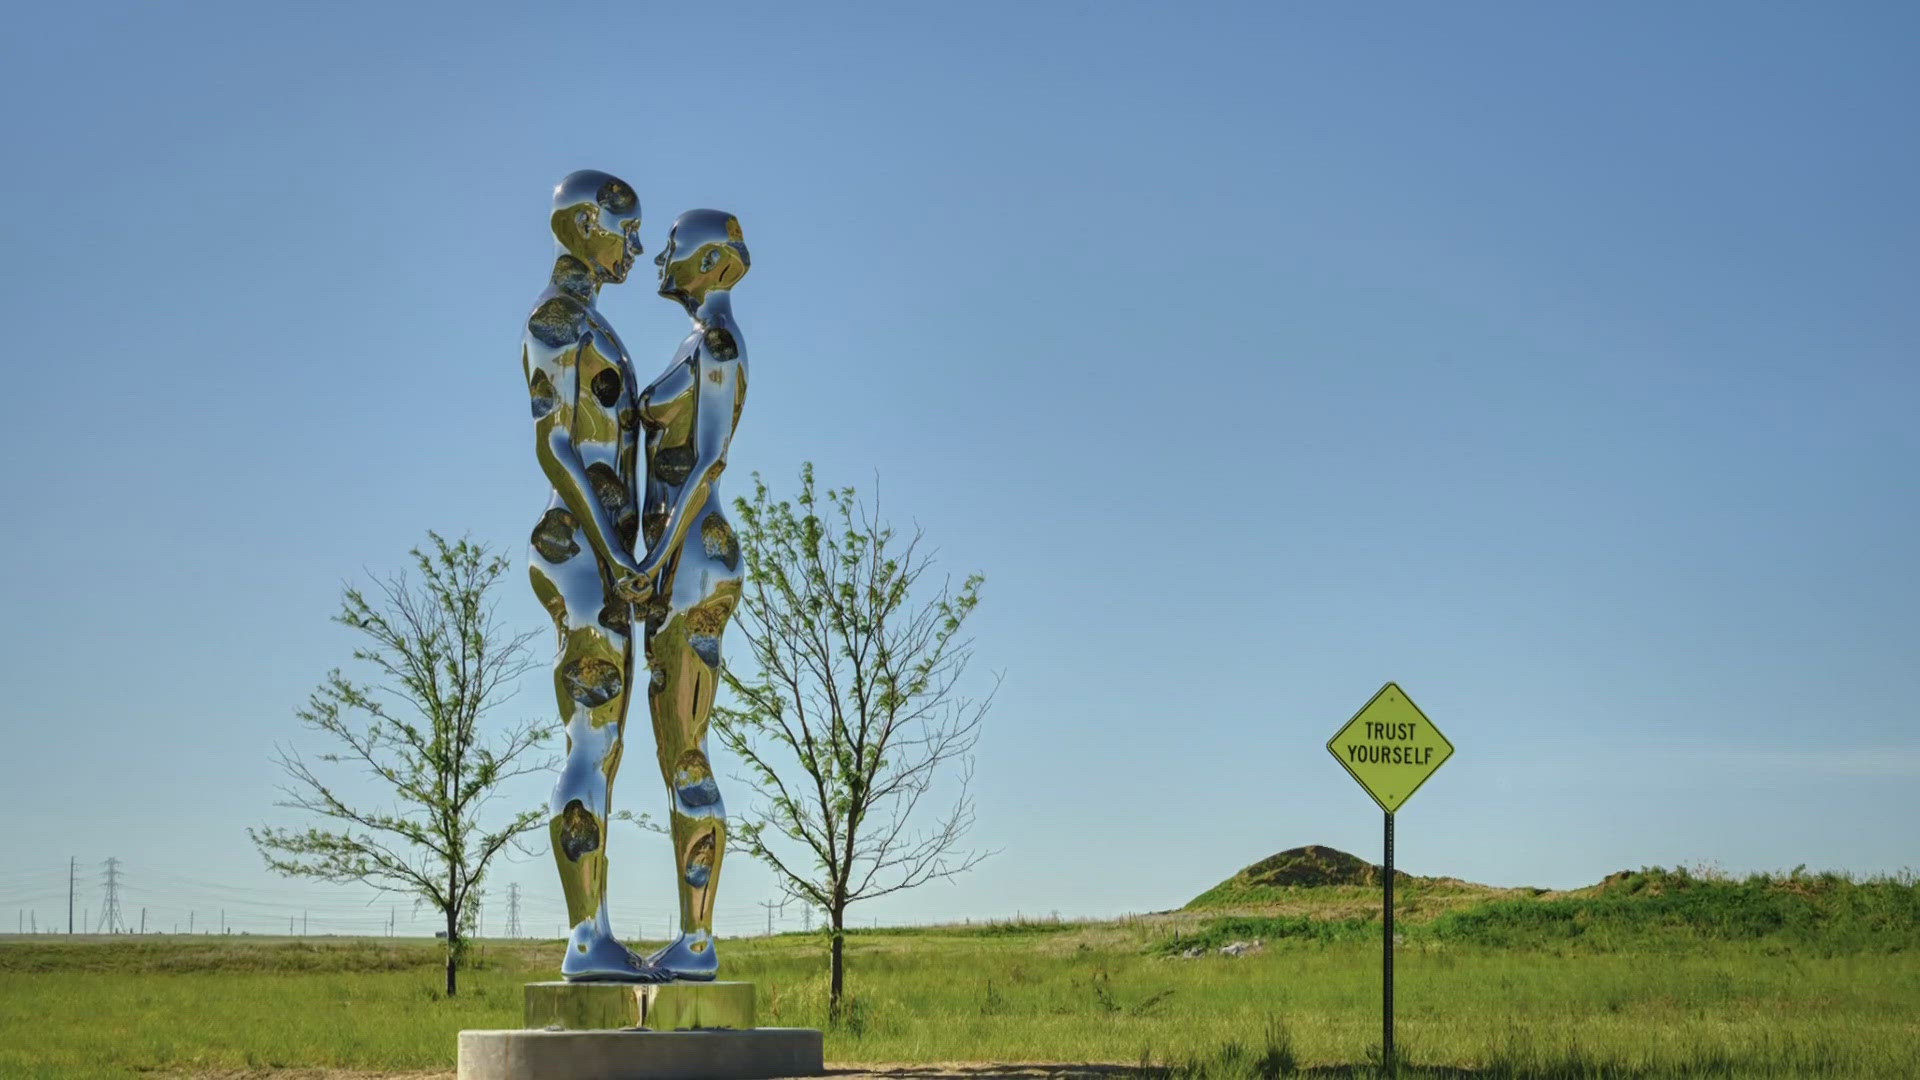 The new installations can be see along a 2-mile art walk located at Hogan Park at Highlands Creek.